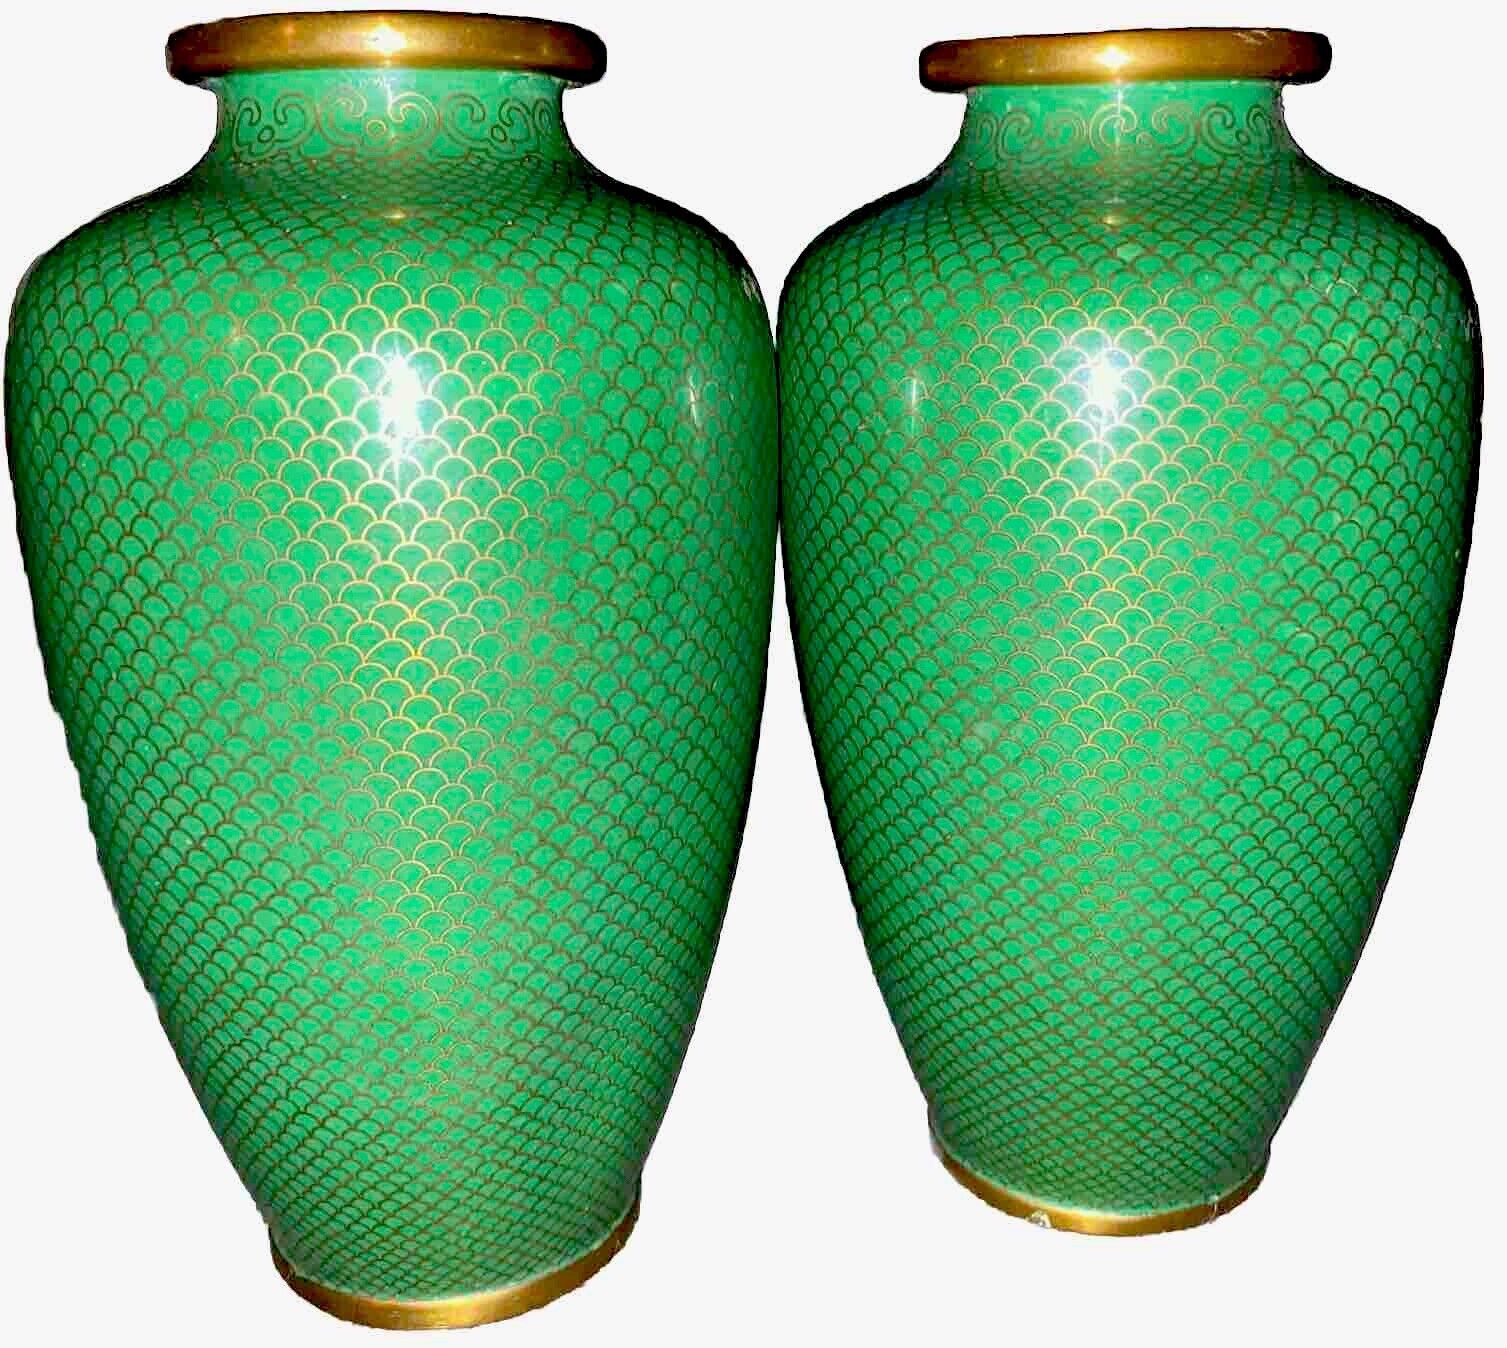 TWO ANTIQUE CHINESE CLOISONNÉ GREEN VASES WITH A SCALES & RUYIS DESIGN PATTERN